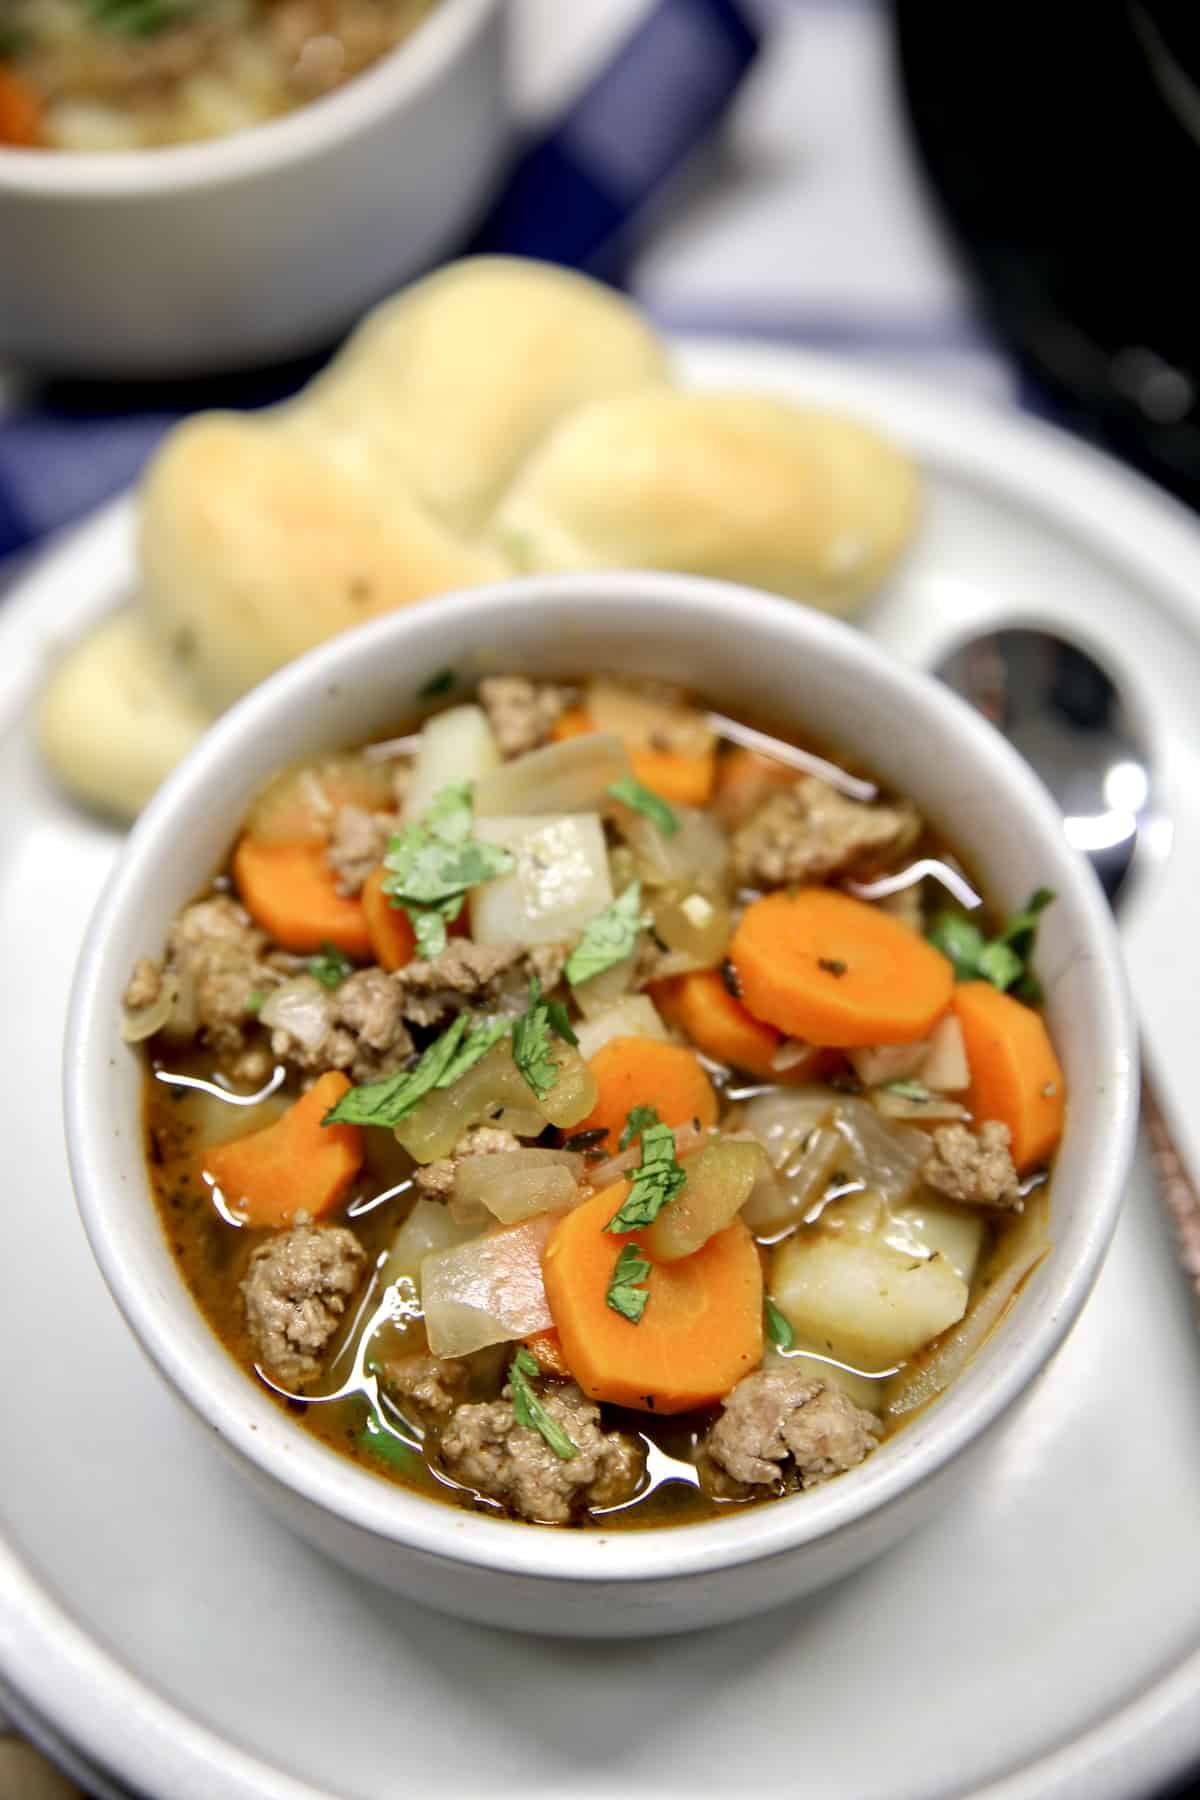 Bowl of ground beef vegetable soup on a plate with a roll.